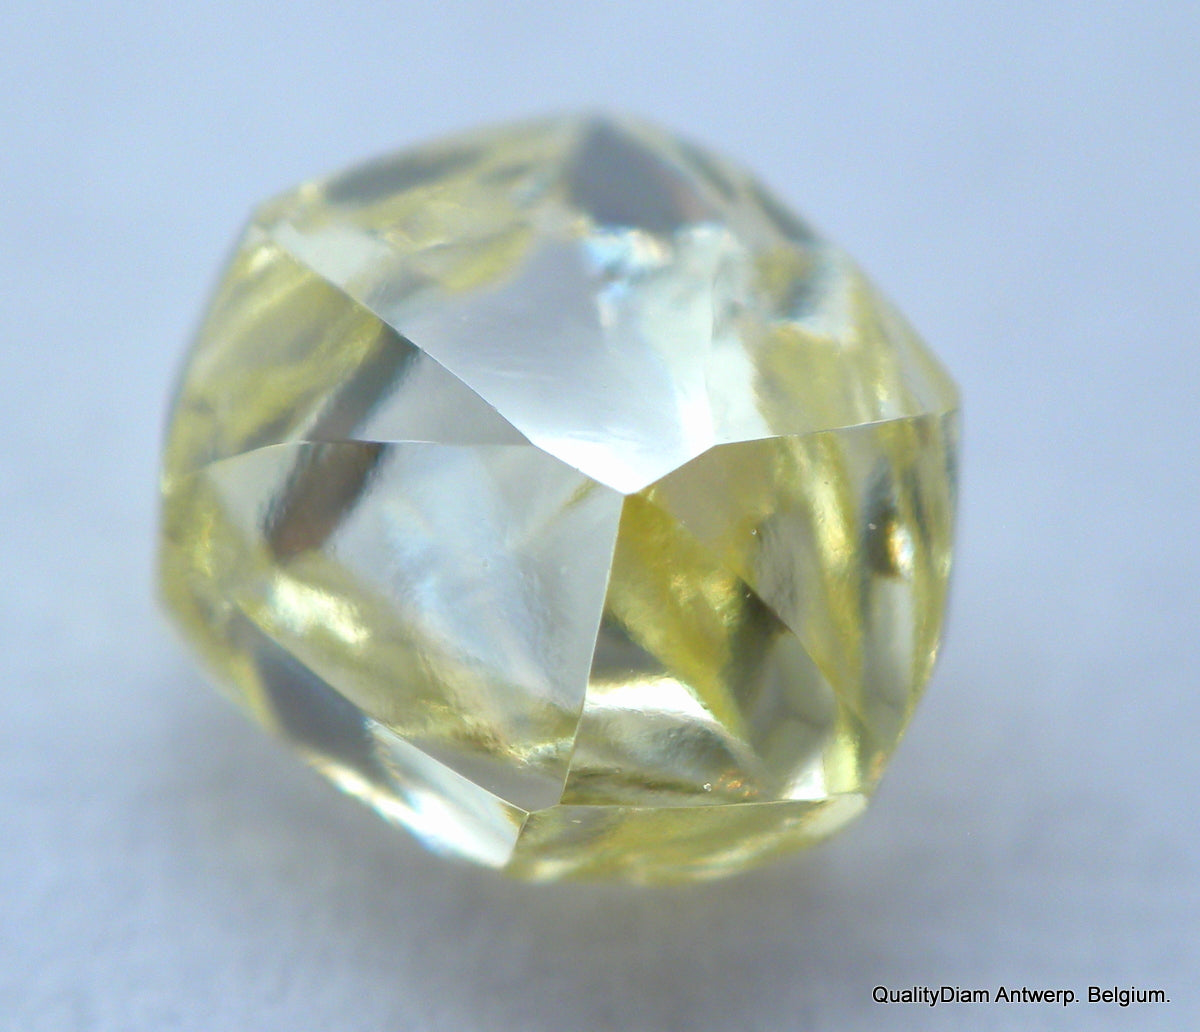 Flawless diamond out from a diamond mine. museum quality natural diamond